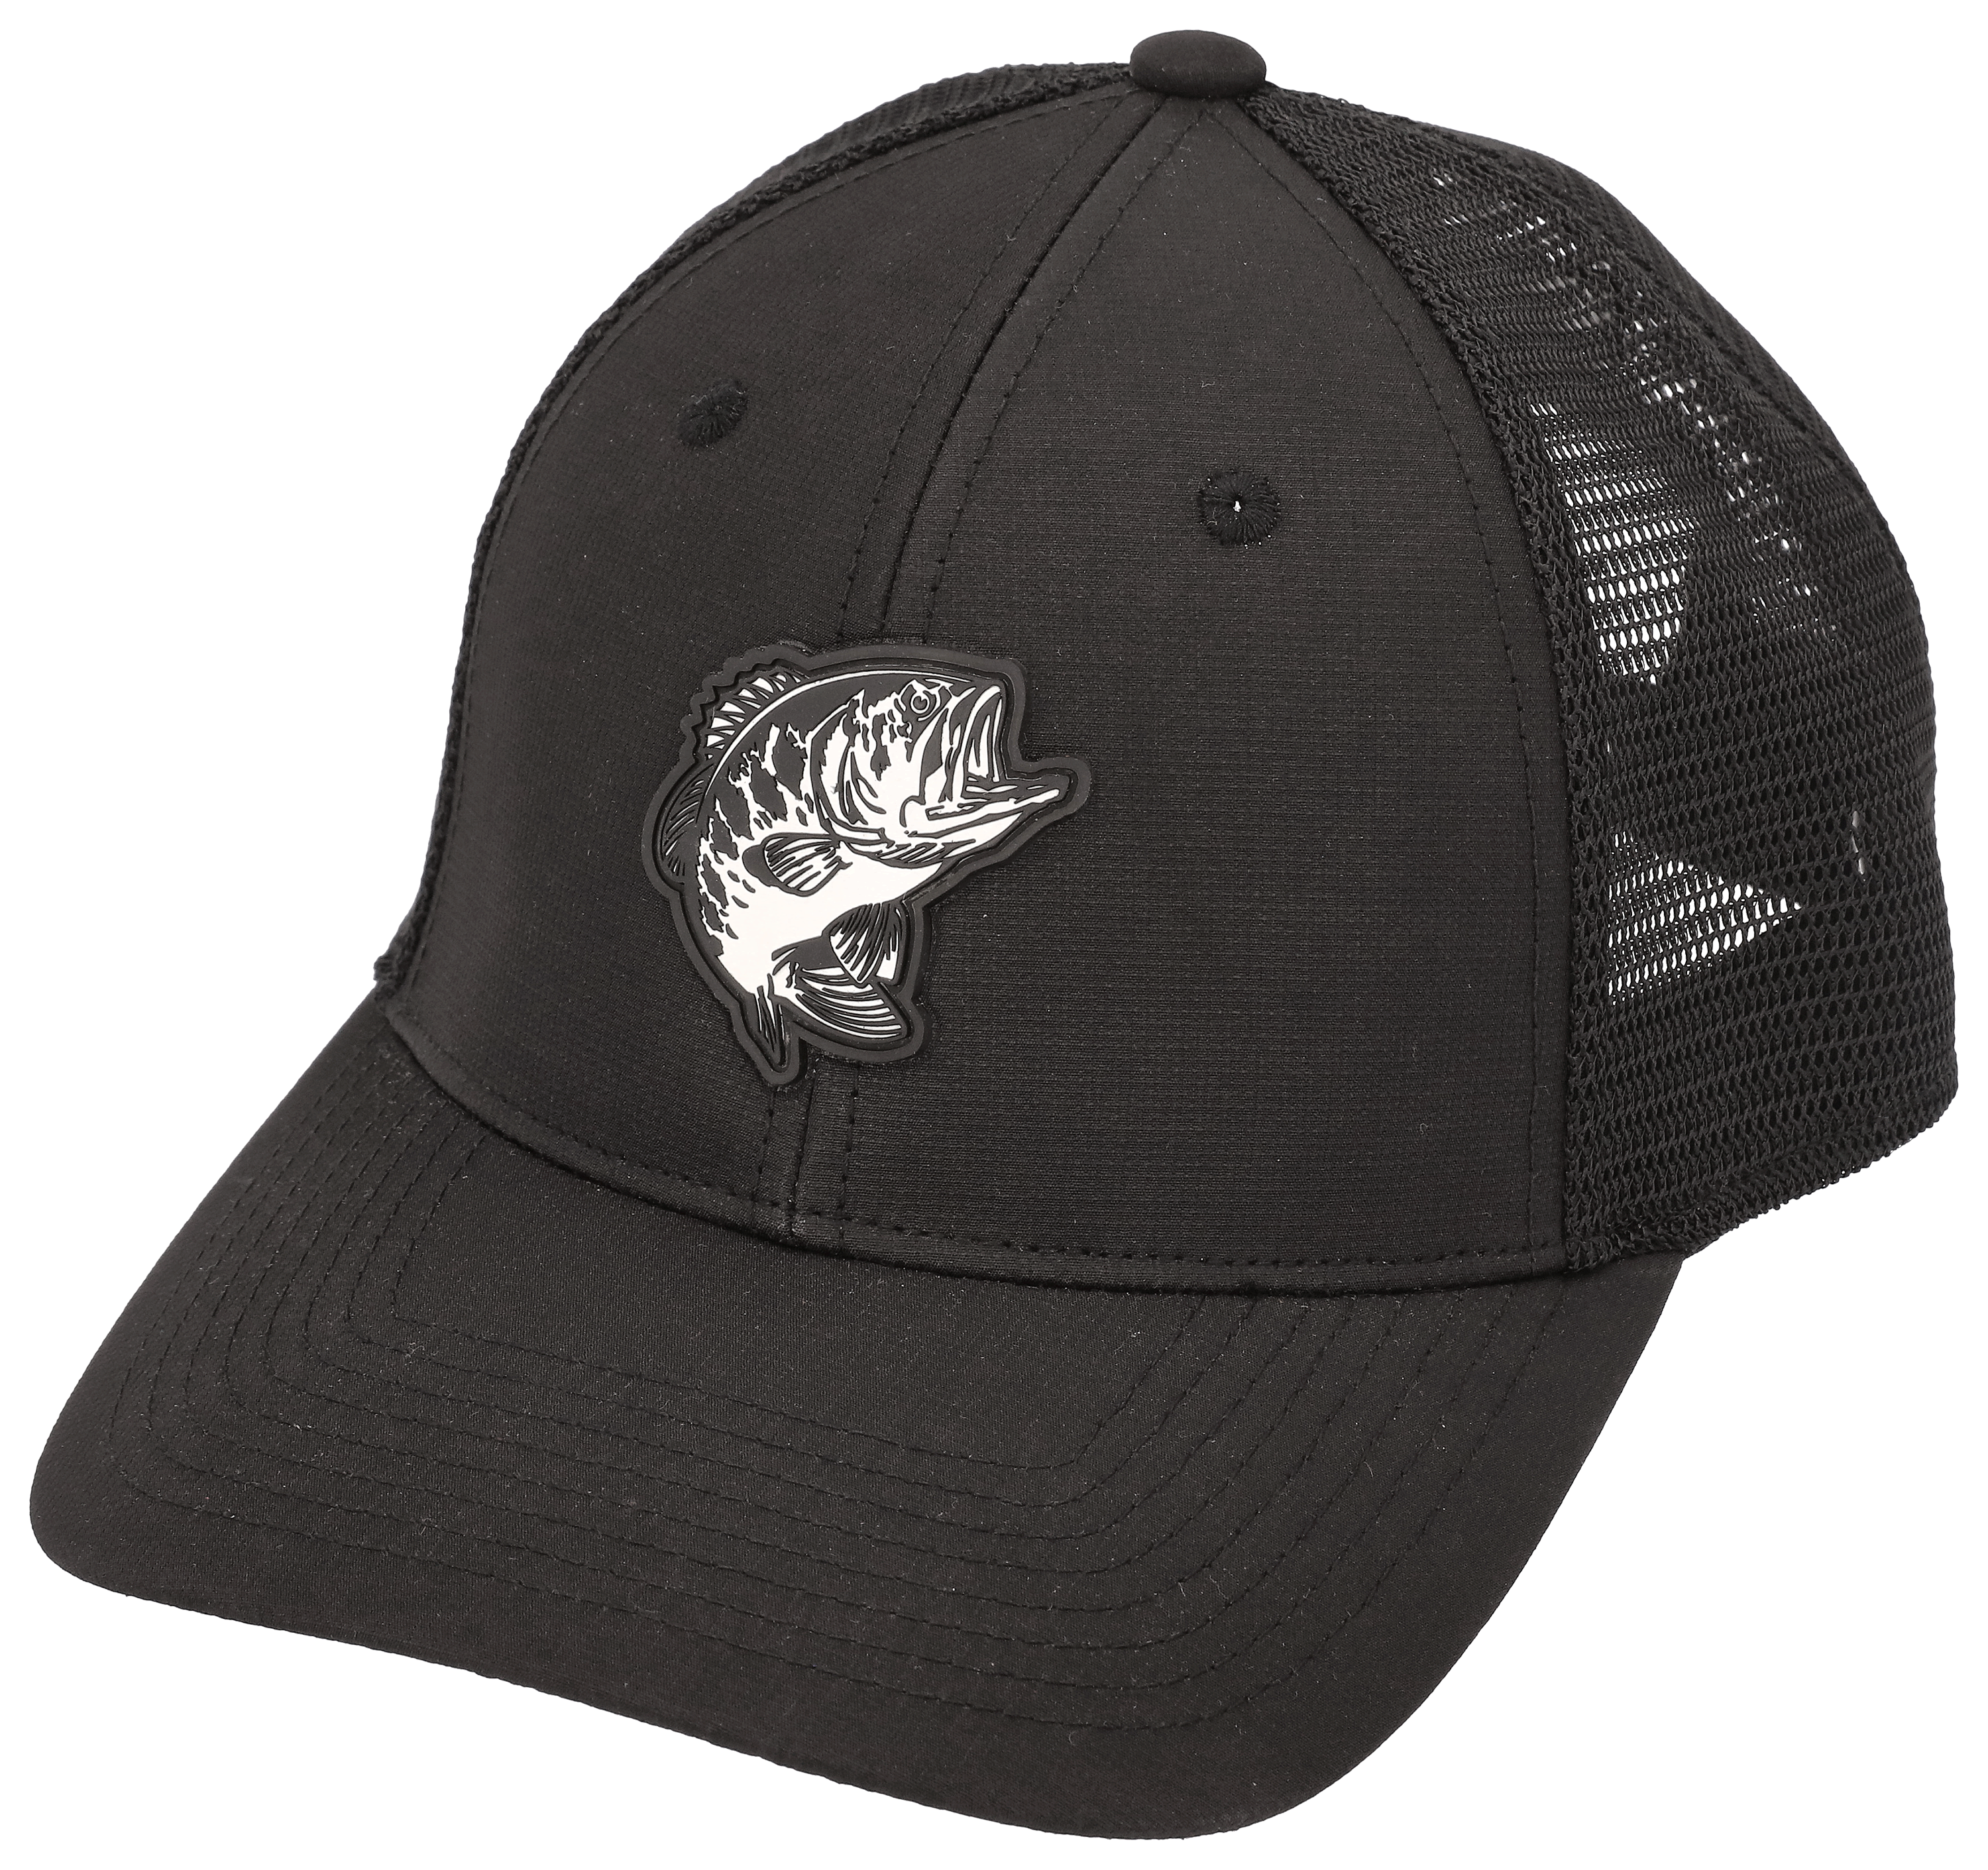 Bass Pro Shop Men's Trucker Hat Mesh Cap - One Size Fits All Snapback  Closure - Great for Hunting & Fishing (Grey) 